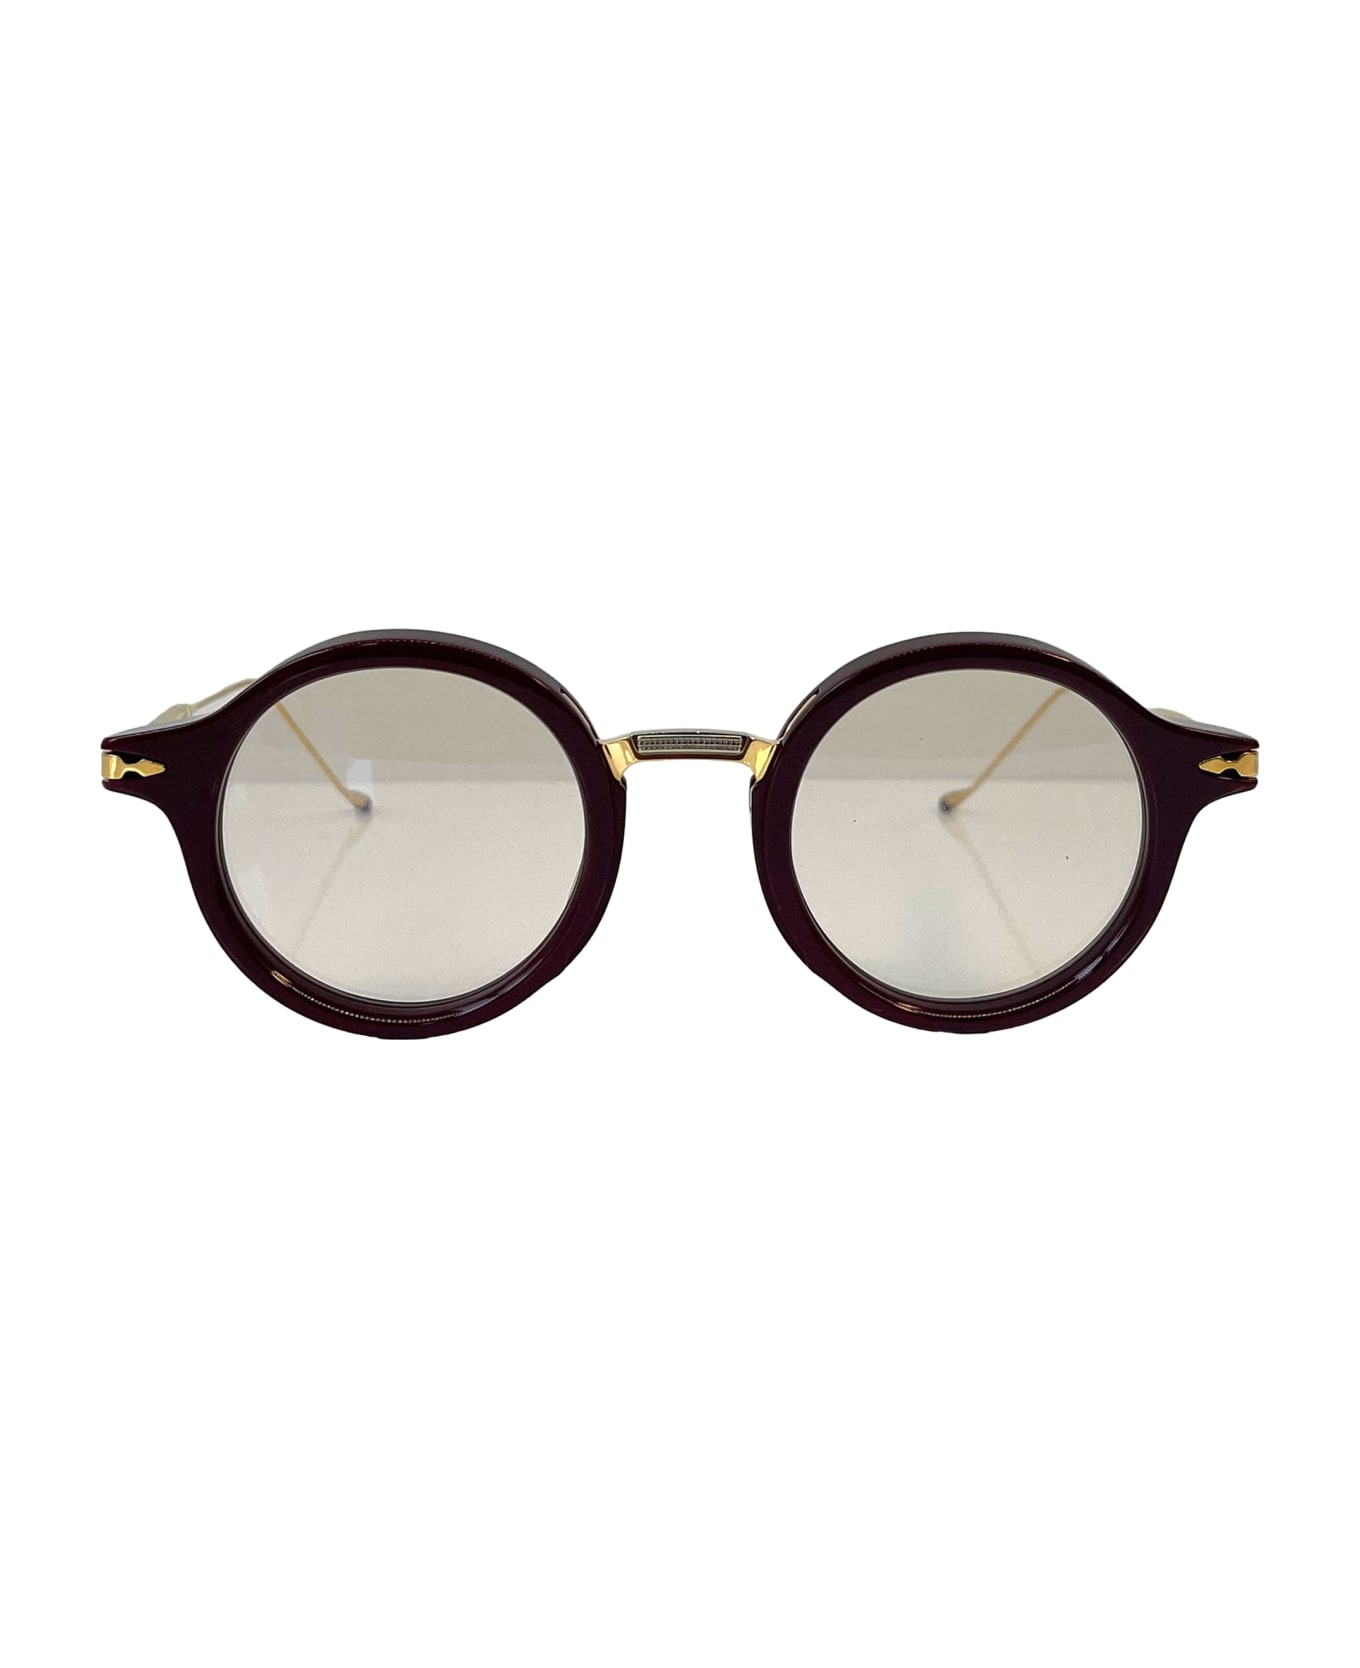 Jacques Marie Mage Norman - Reserve Rx Glasses - burgundy